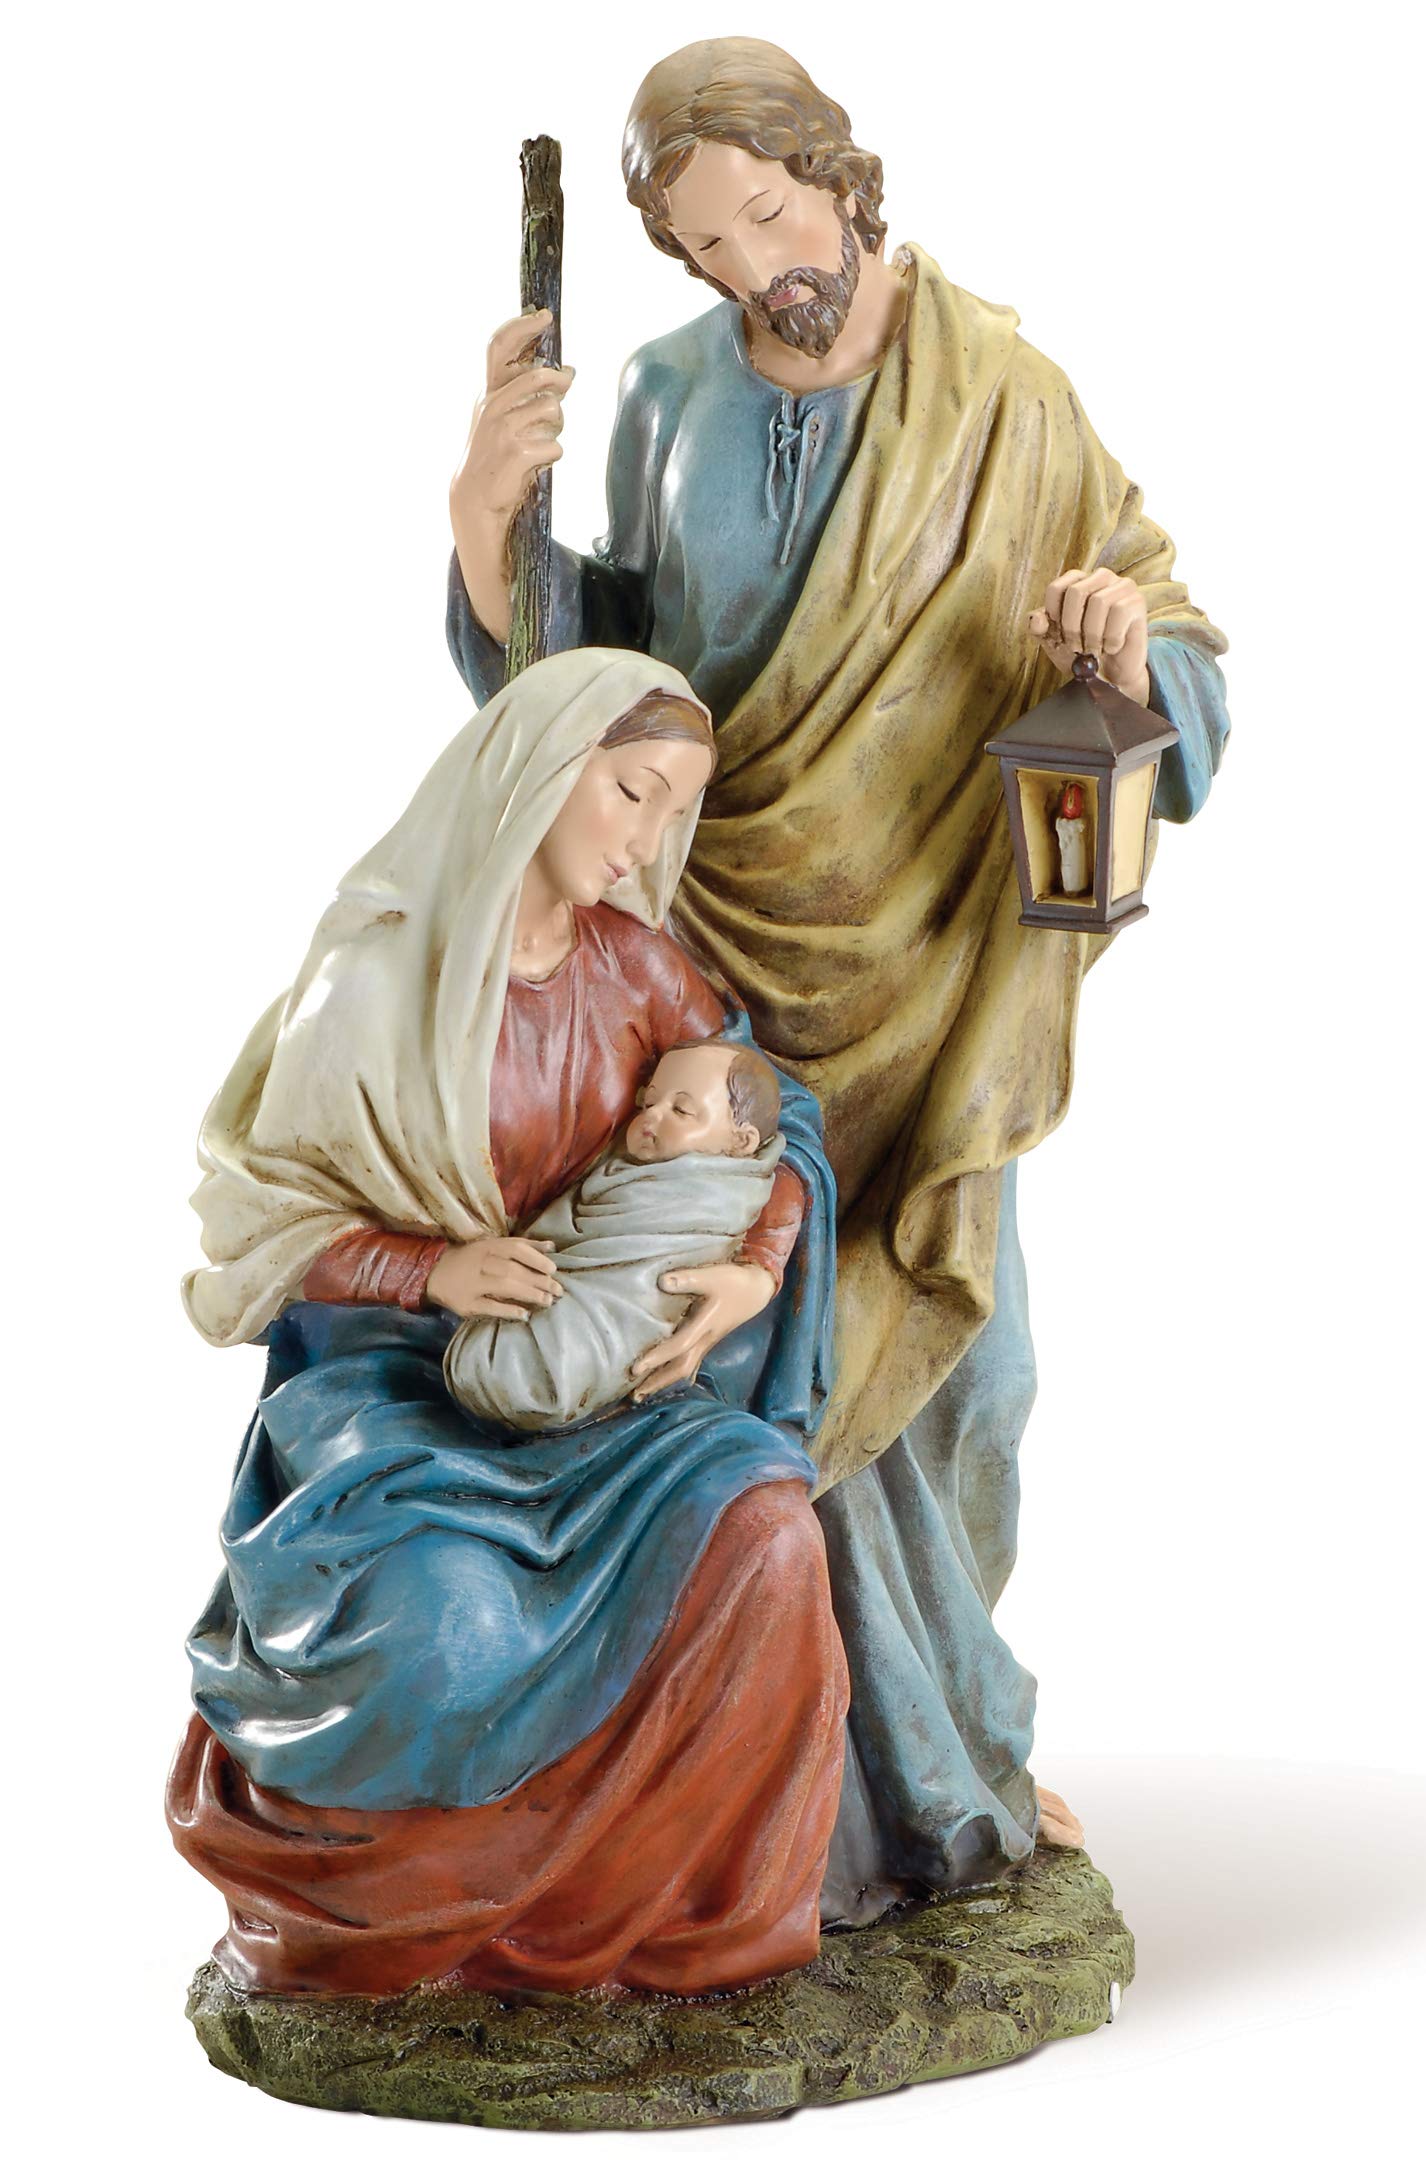 Joseph's Studio by Roman - Holy Family Figure on Base, Life of Christ, Renaissance Collection, 15.5" H, Resin and Stone, Religious Gift, De...